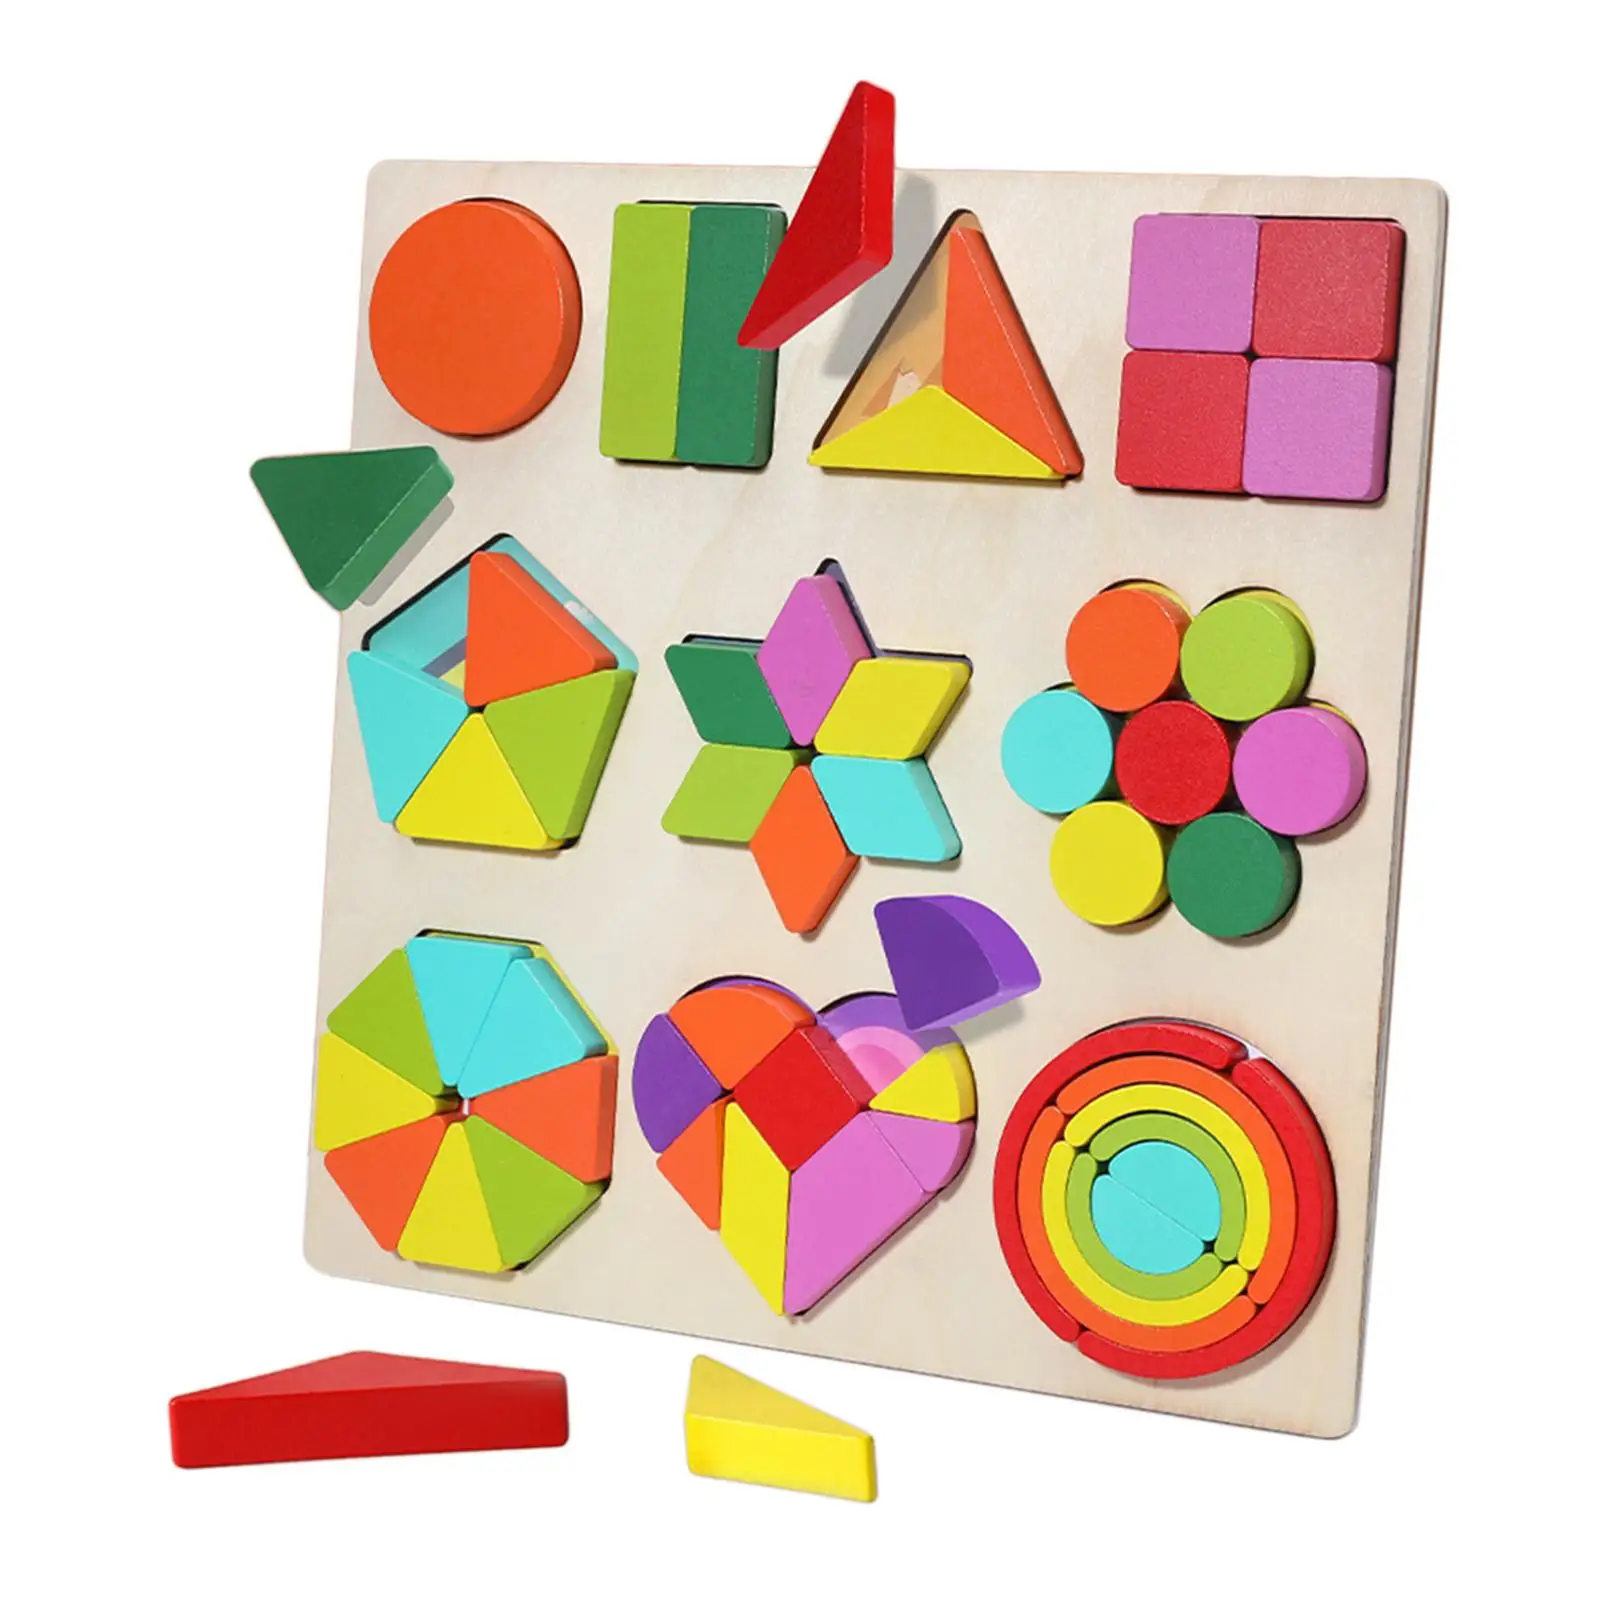 Wooden Puzzle Parent Child Game match shape Educational Game Board Innovation Toys Brain Training Games Preschool Baby